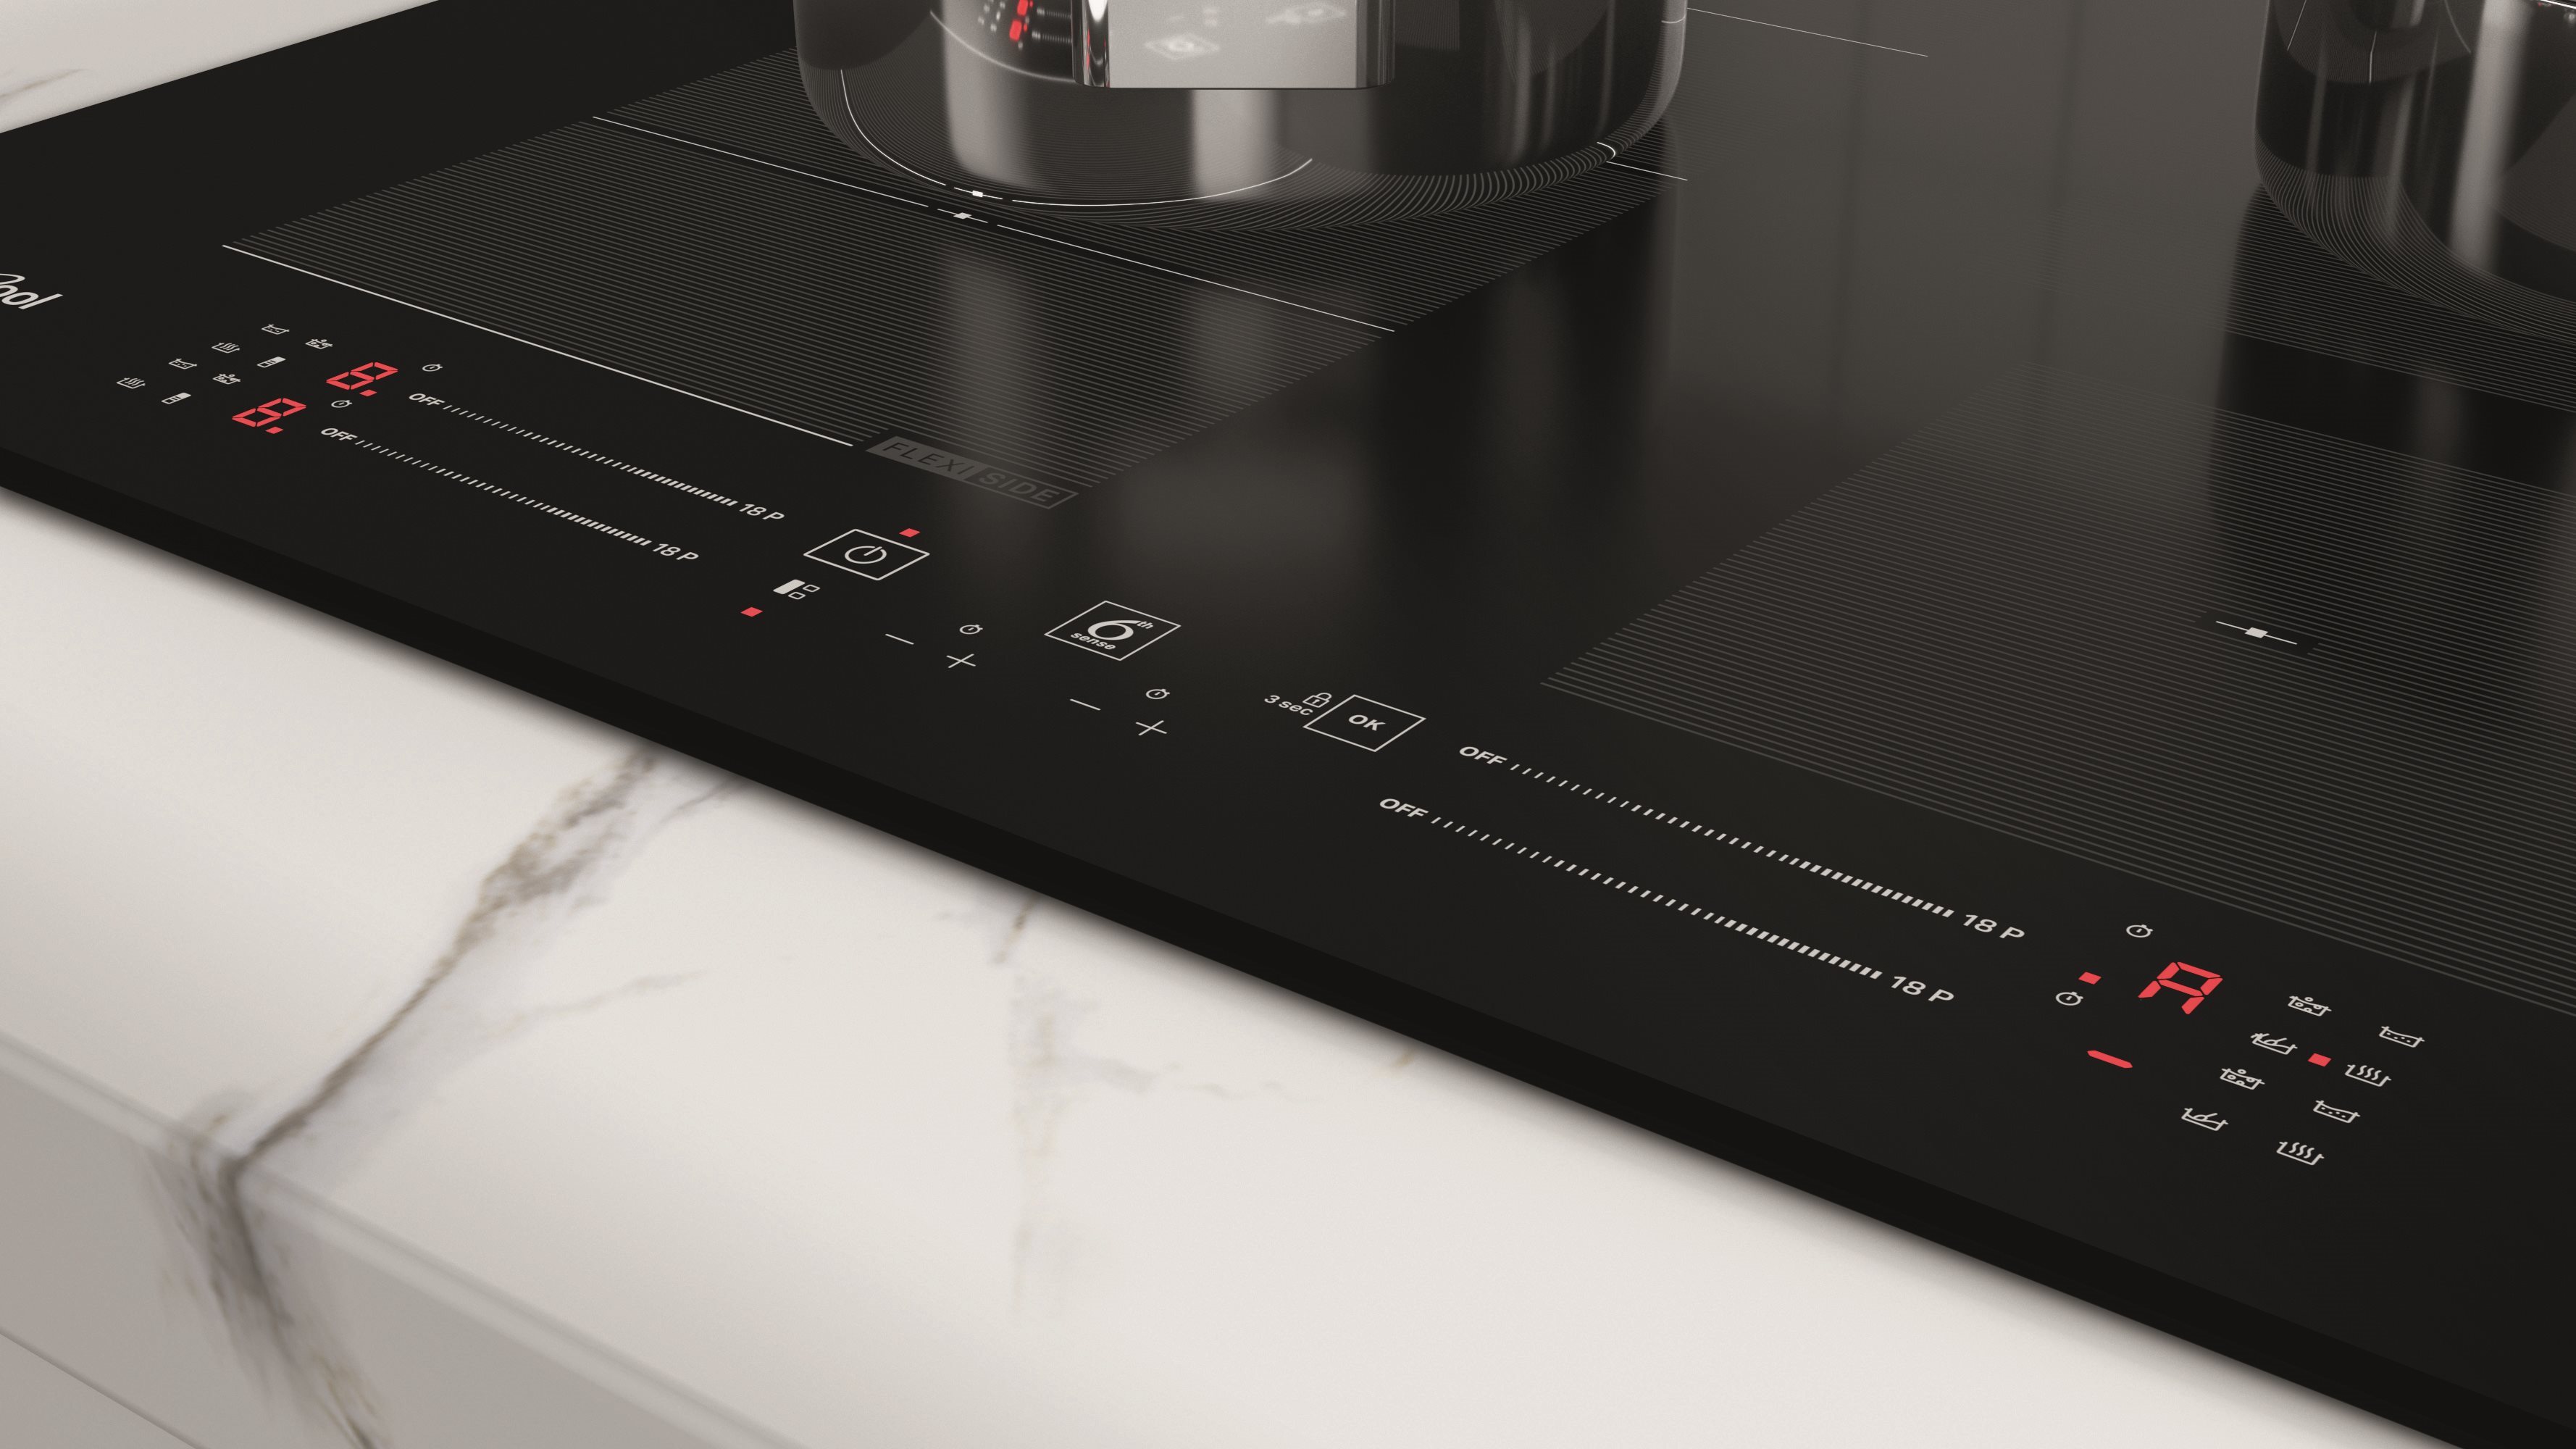 Cooktop WHIRLPOOL WF S9365 BF/IXL ...